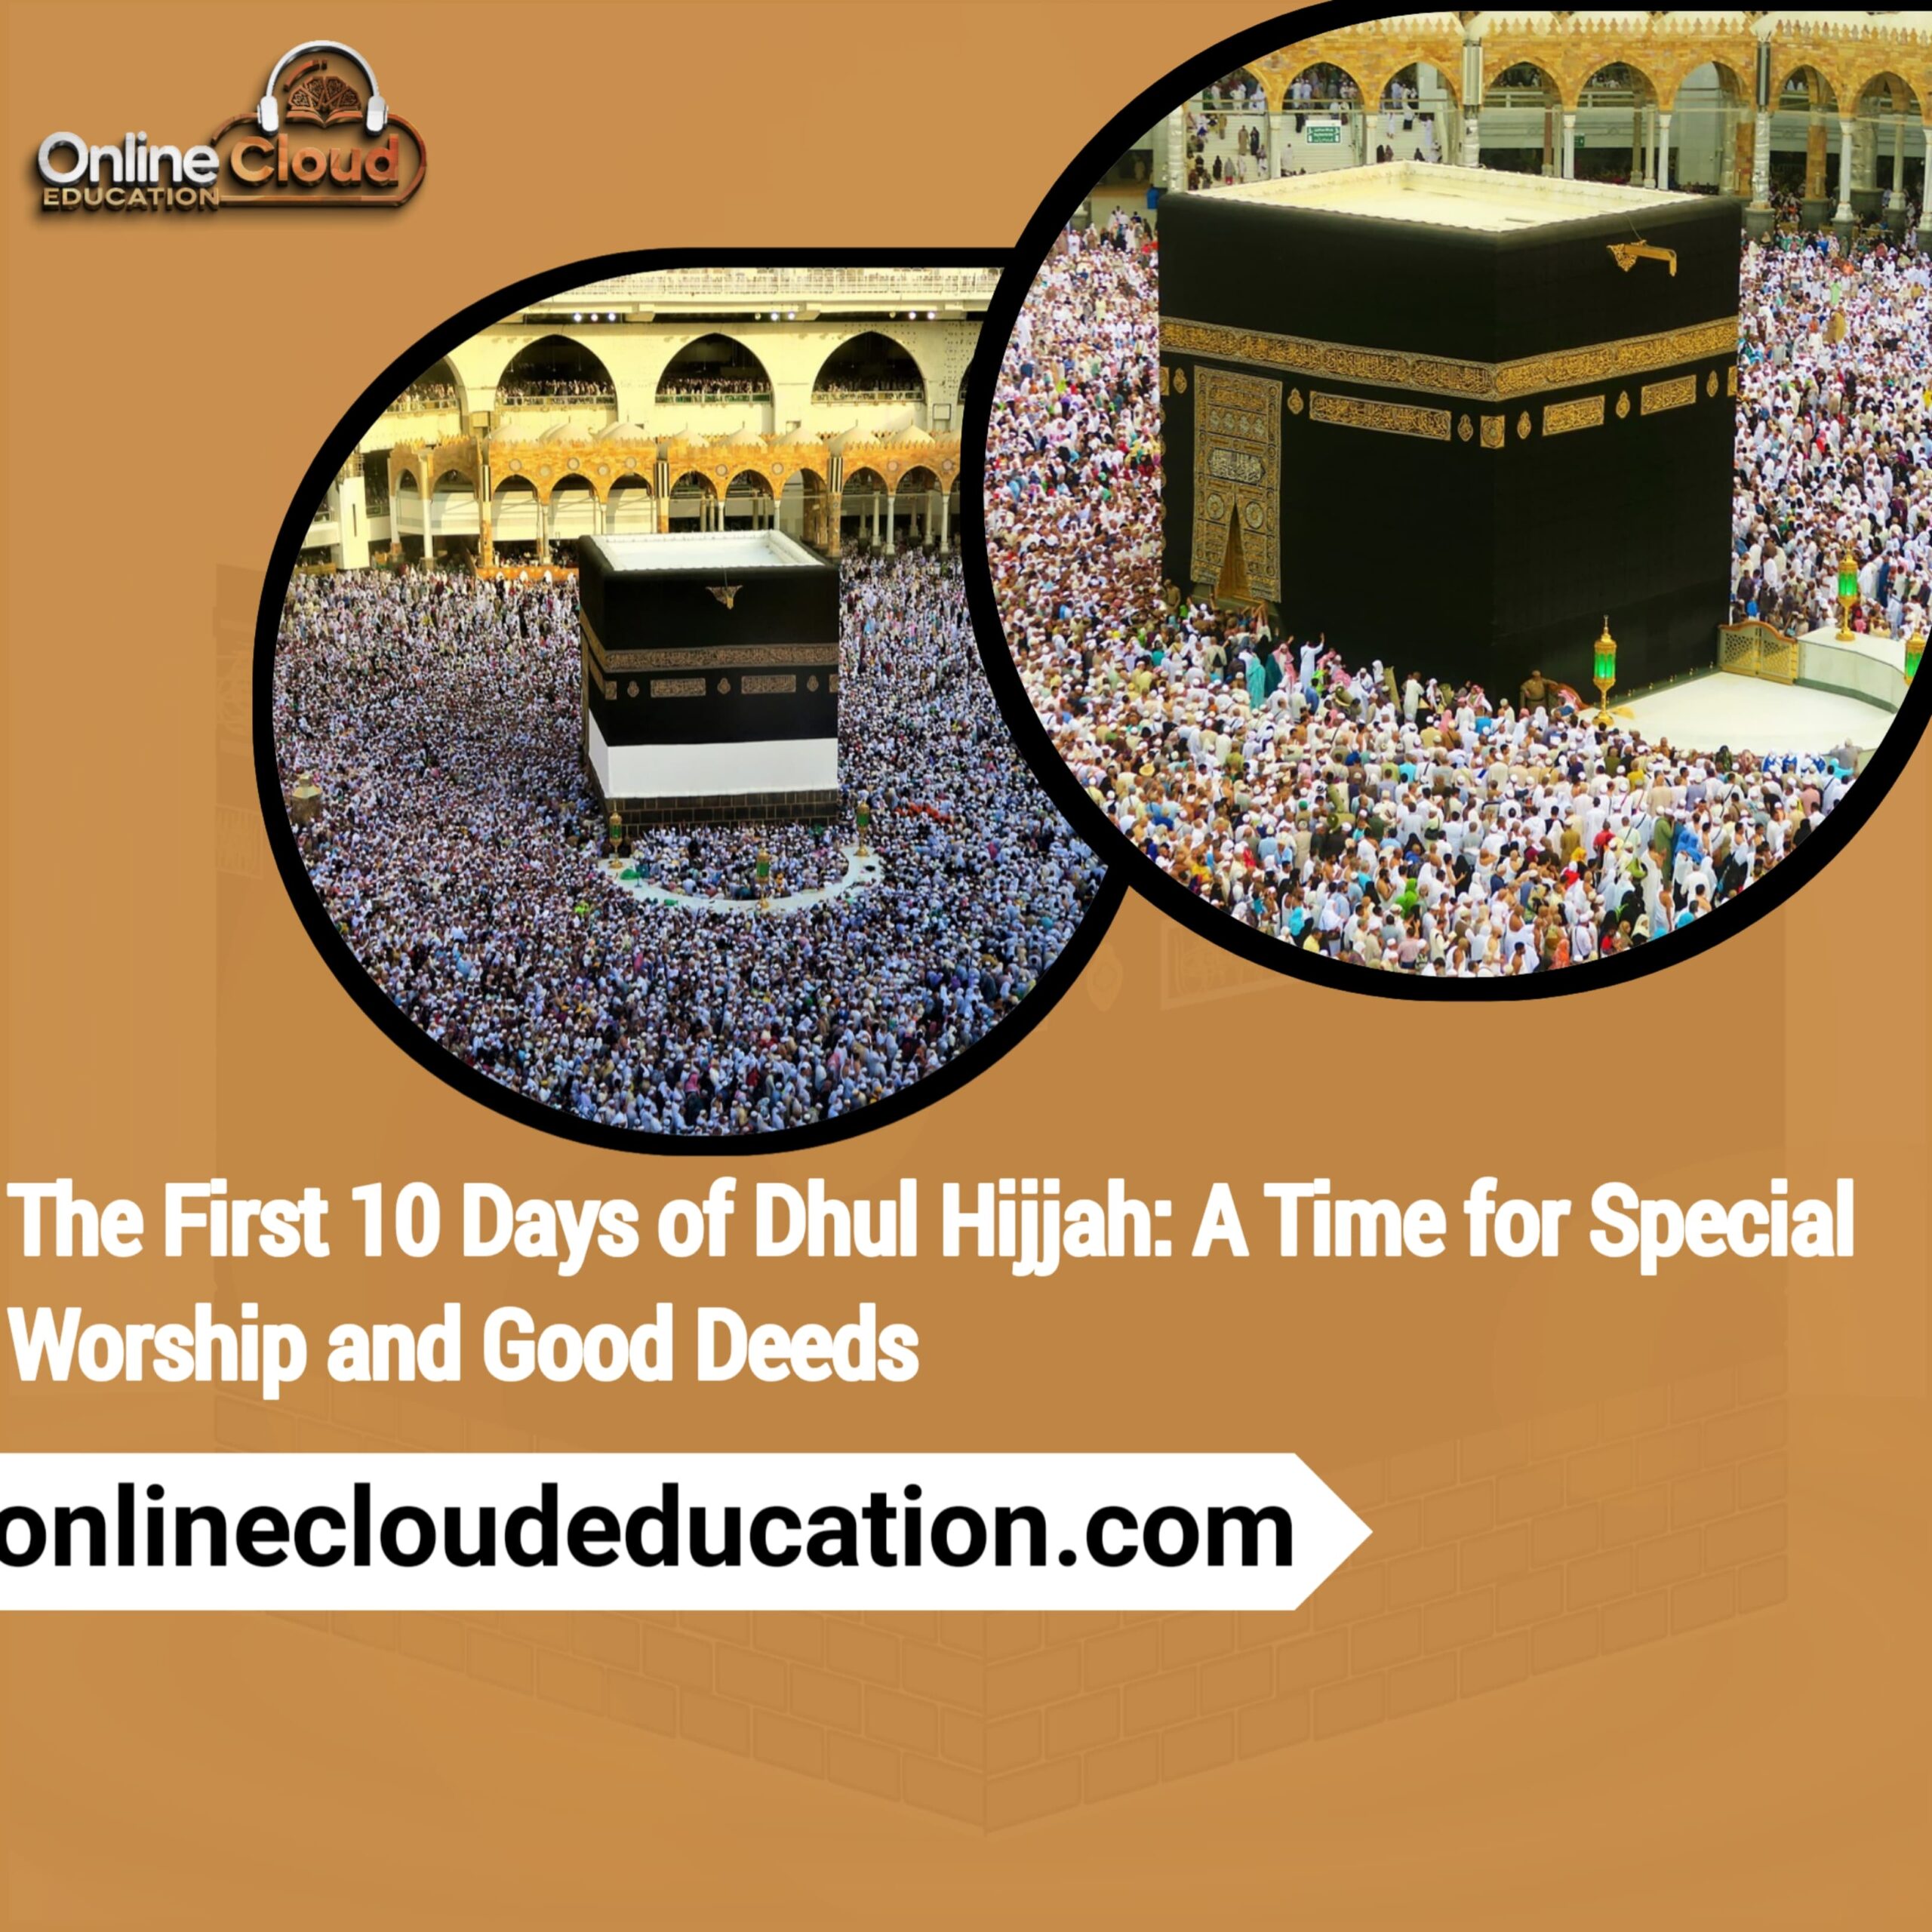 The First 10 Days of Dhul Hijjah: A Time for Special Worship and Good Deeds